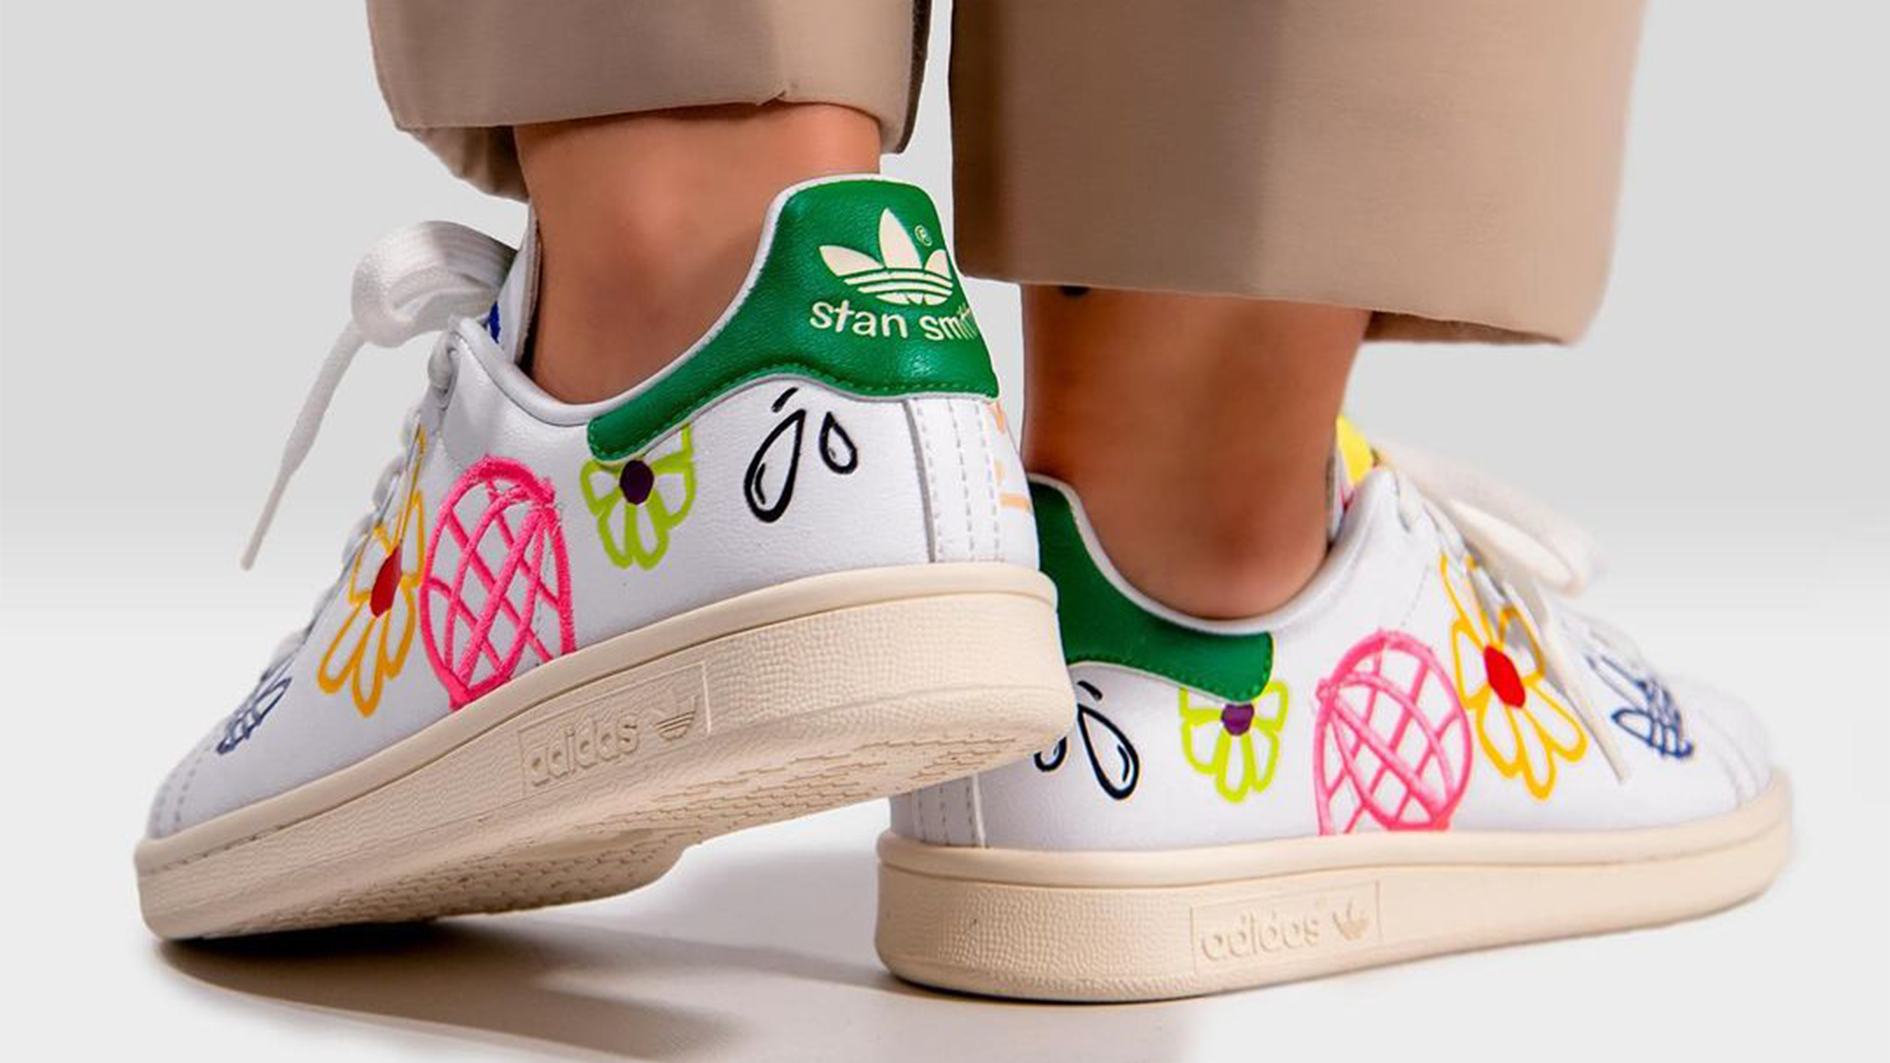 Bourgeon Aanklager Plantage adidas Stan Smith Sizing: How Do They Fit? | The Sole Supplier